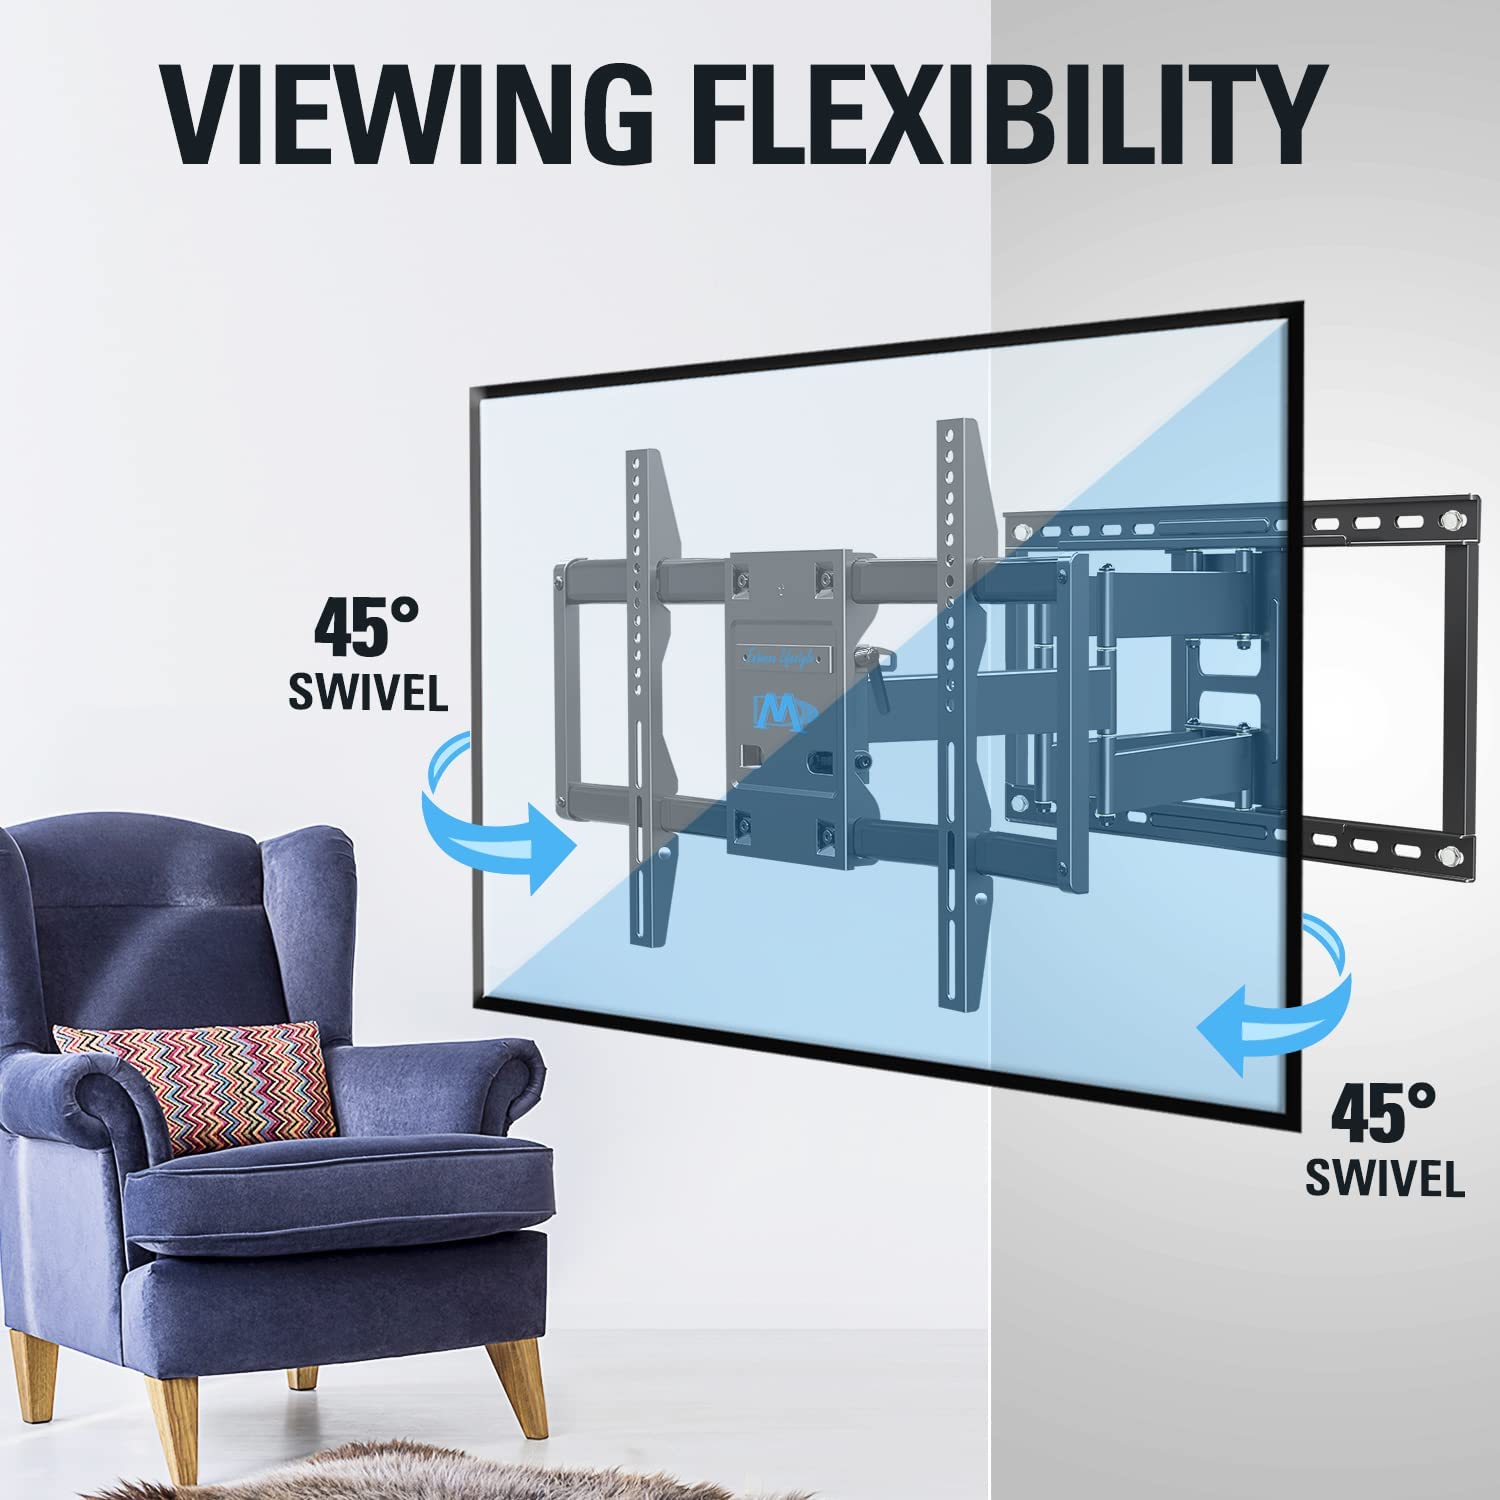 swivel TV mount for flexible viewing